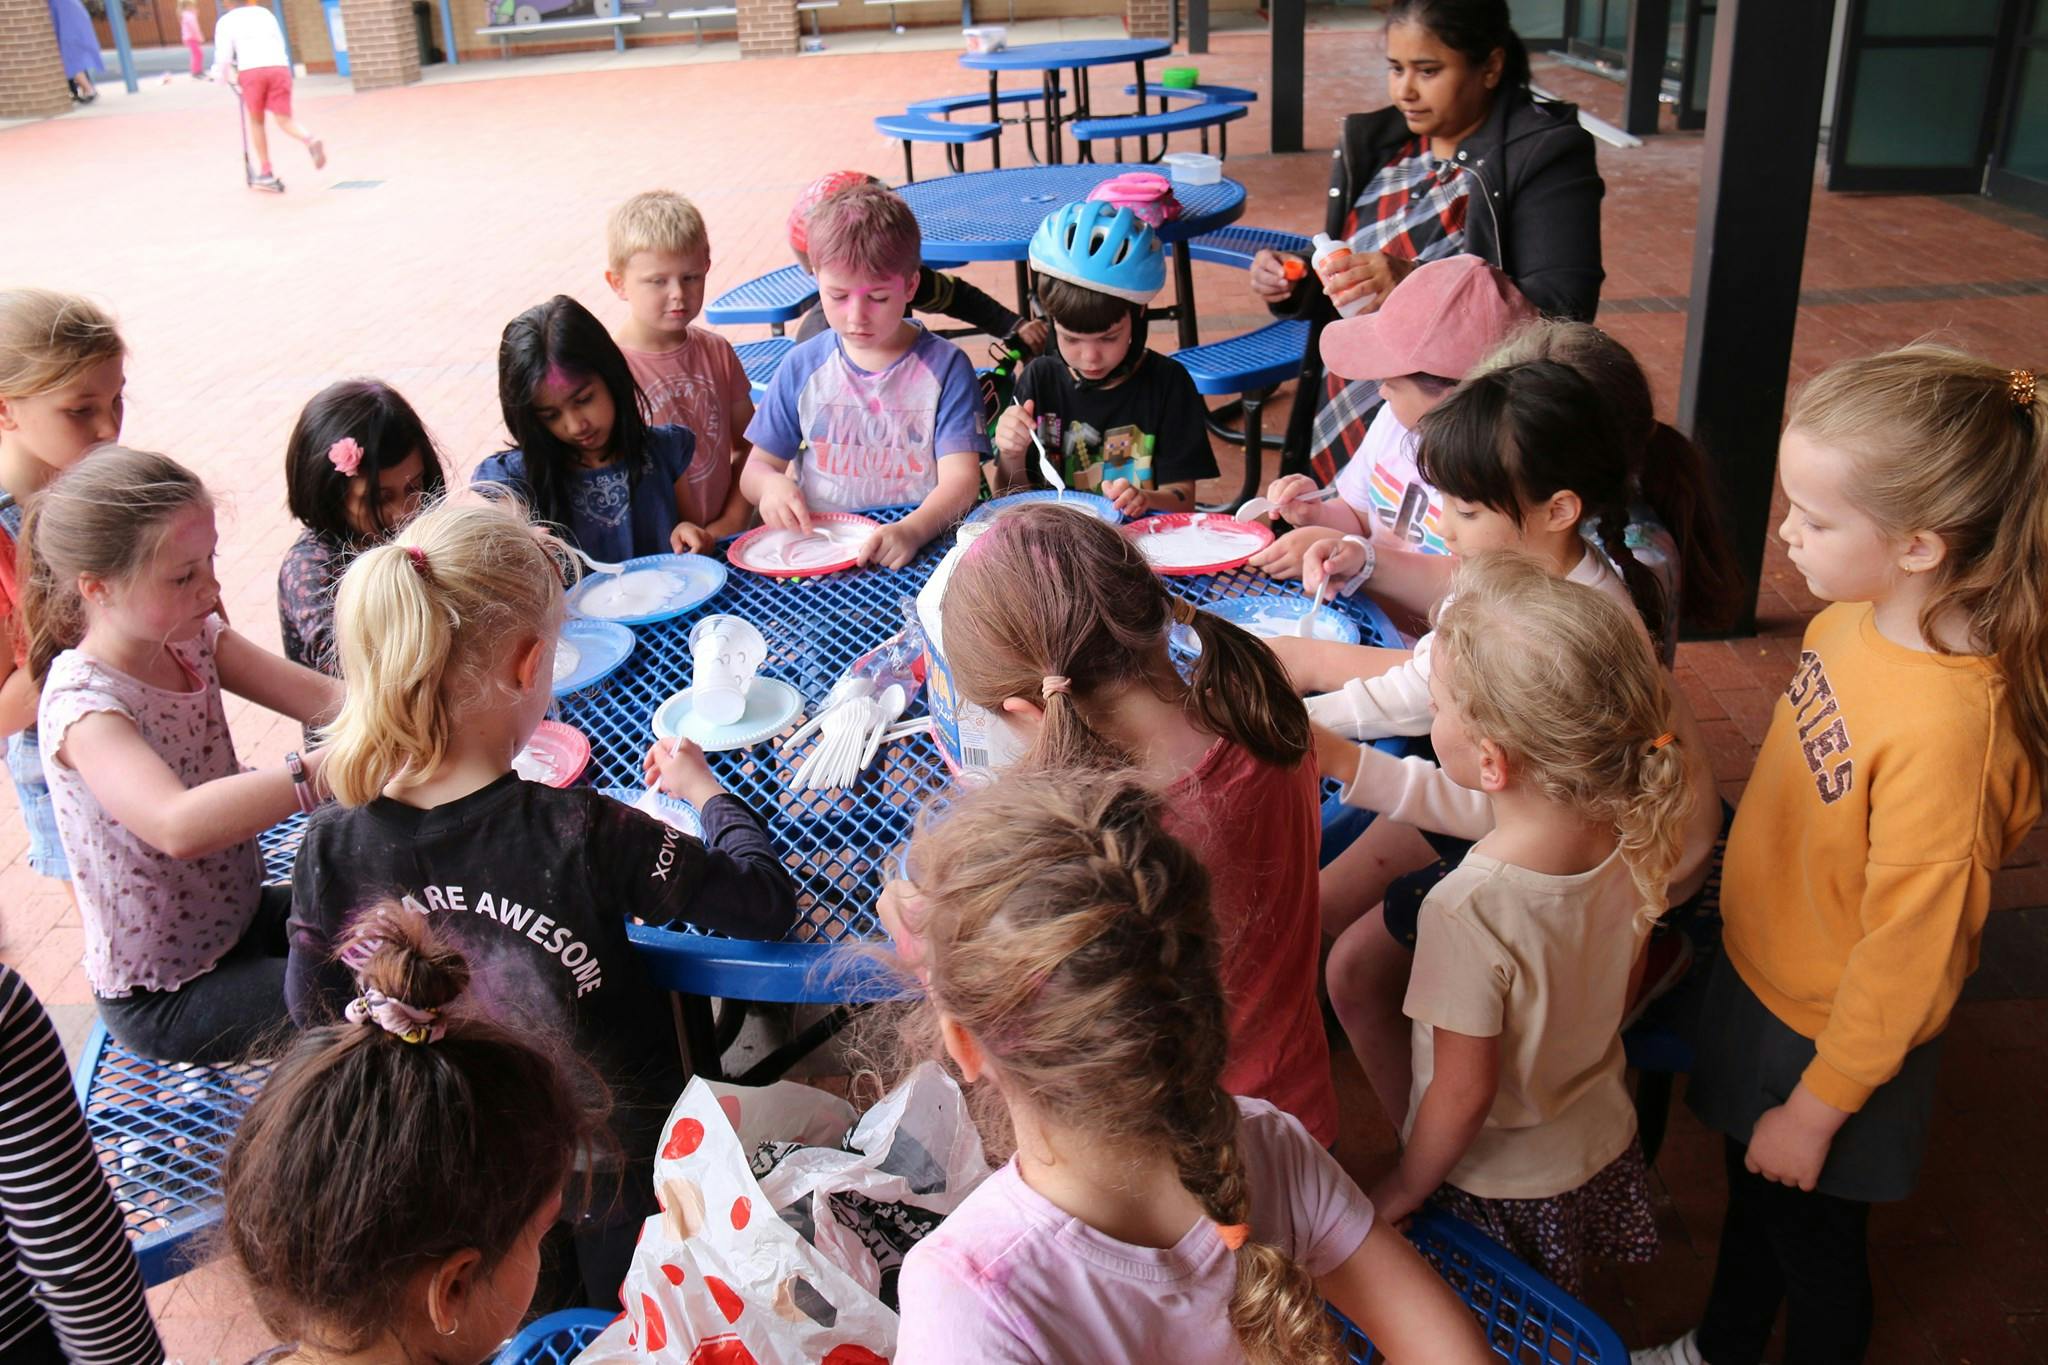 A group of children at one of our School Holiday programs playing games on a table.